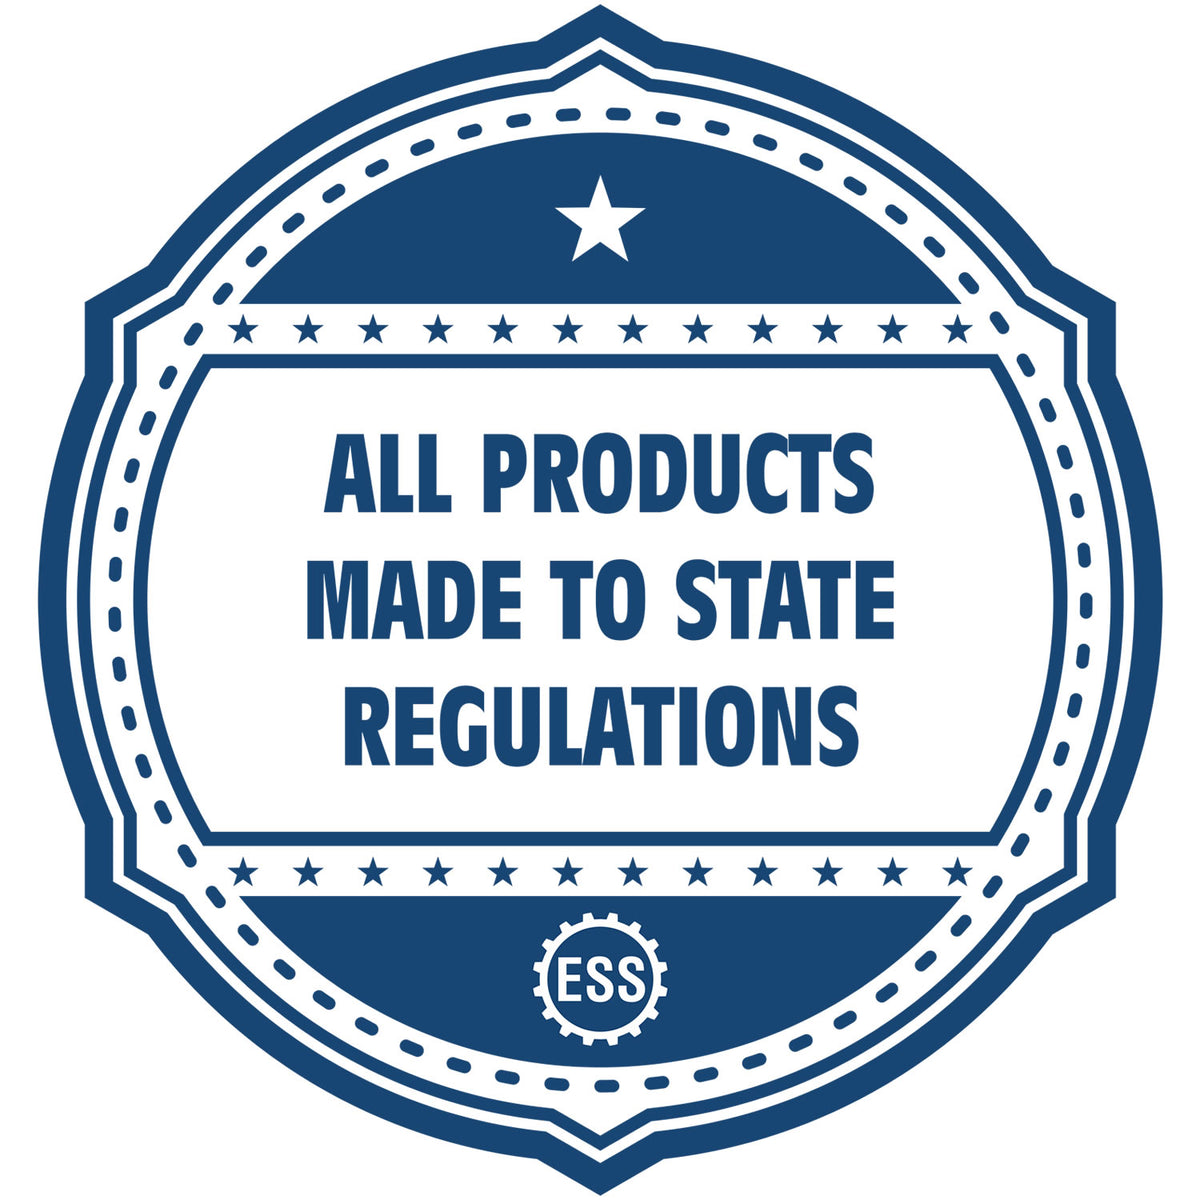 A blue icon or badge for the Gift Florida Engineer Seal showing that this product is made in compliance with state regulations.